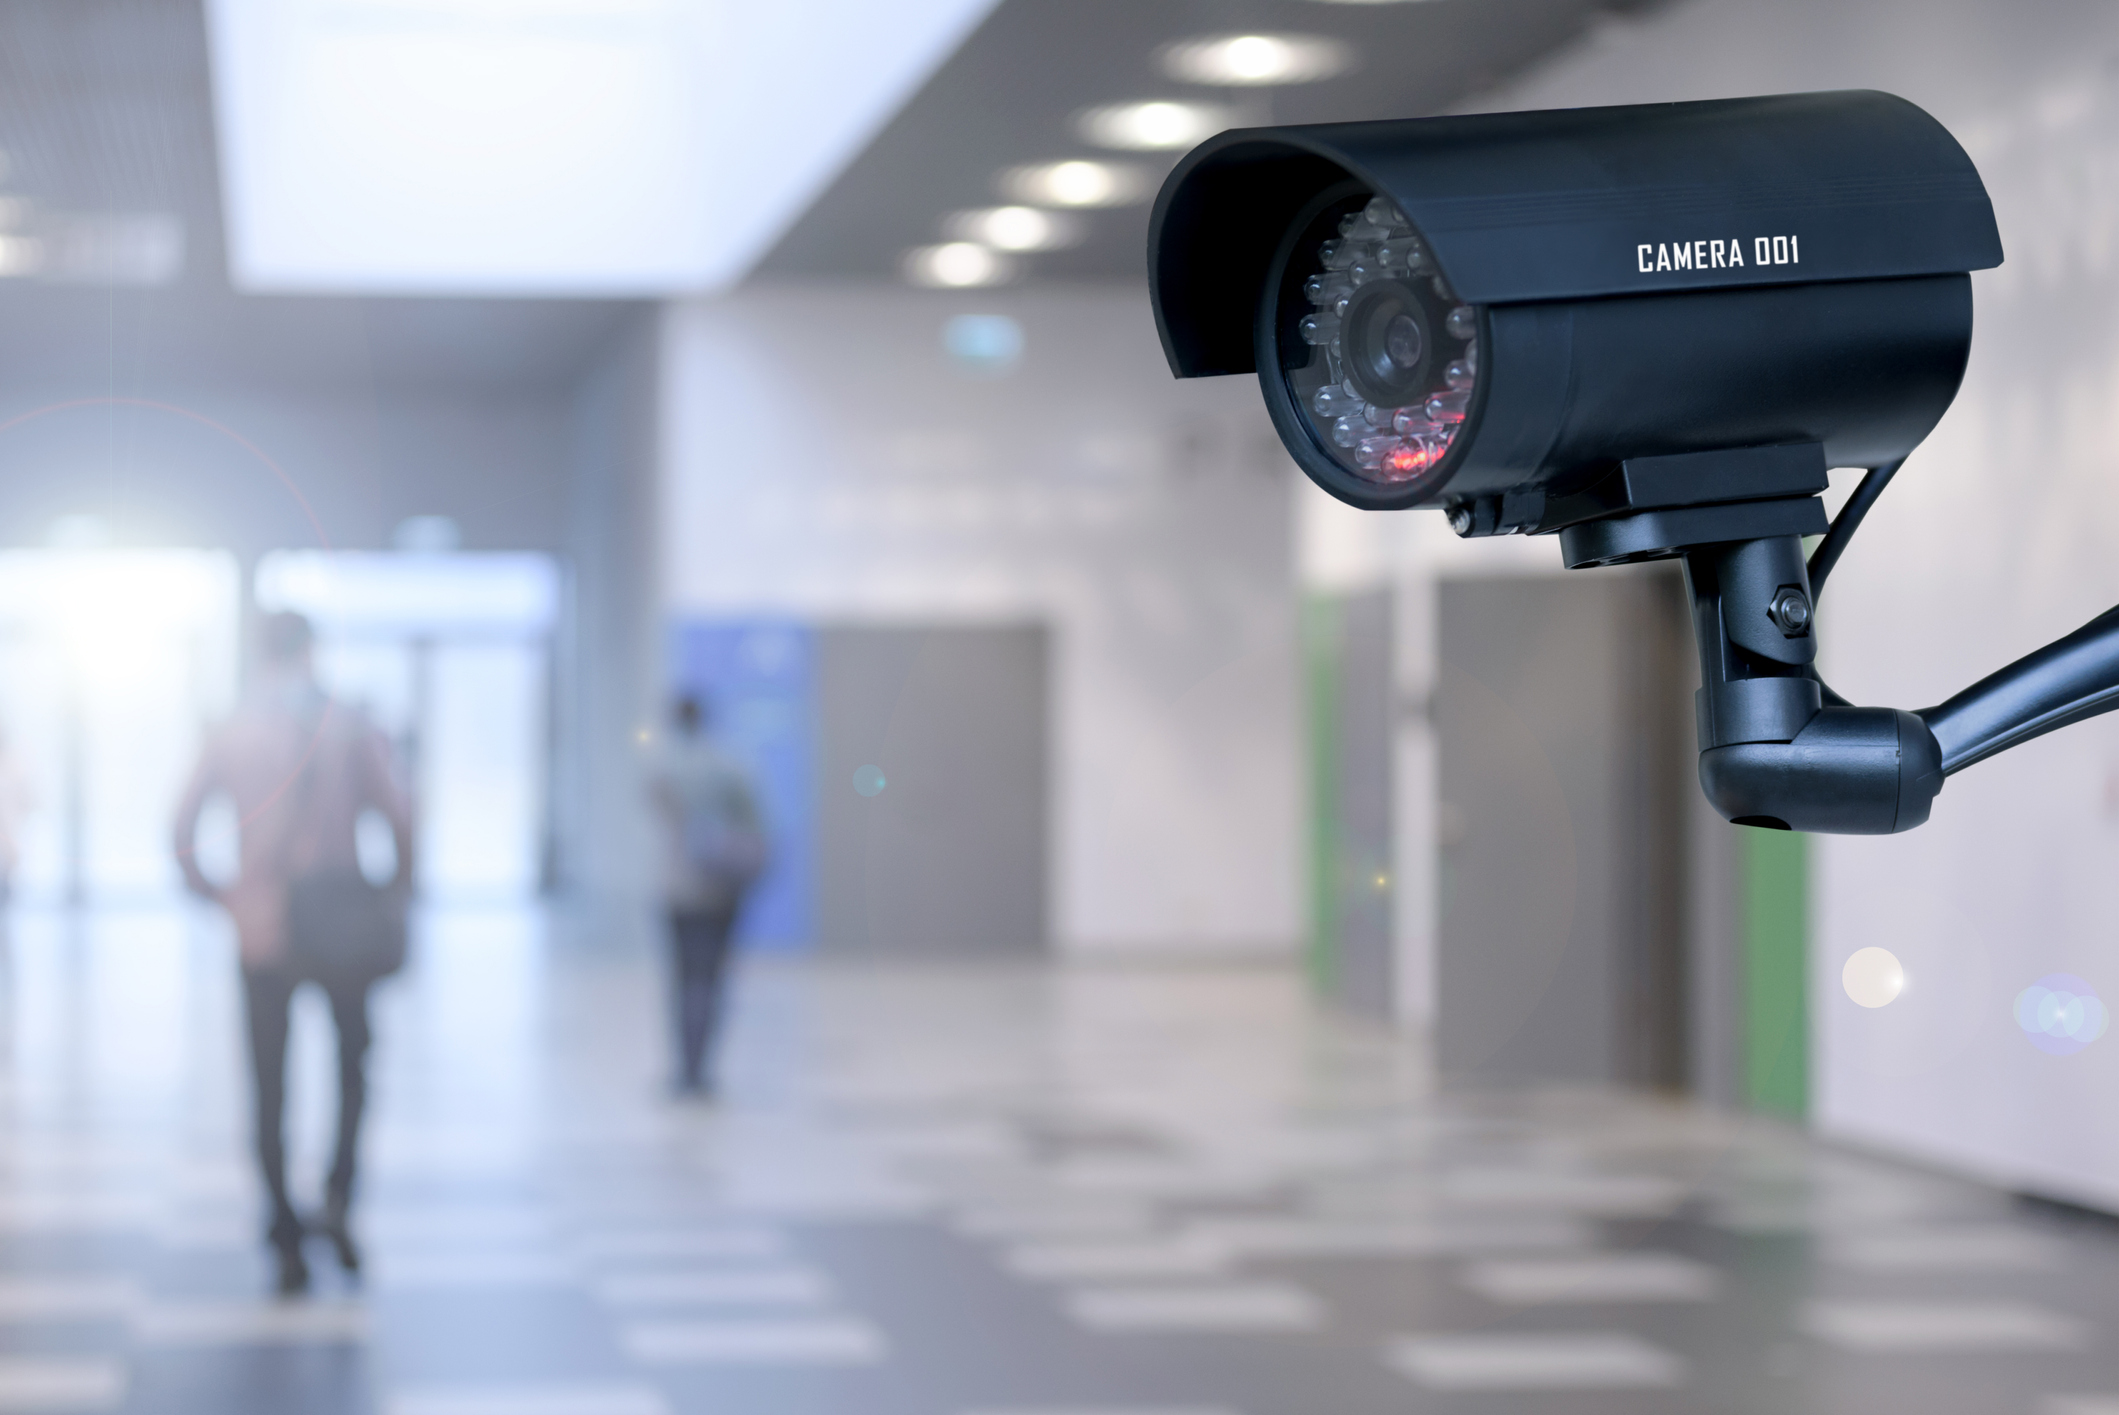 Which security camera company is best?